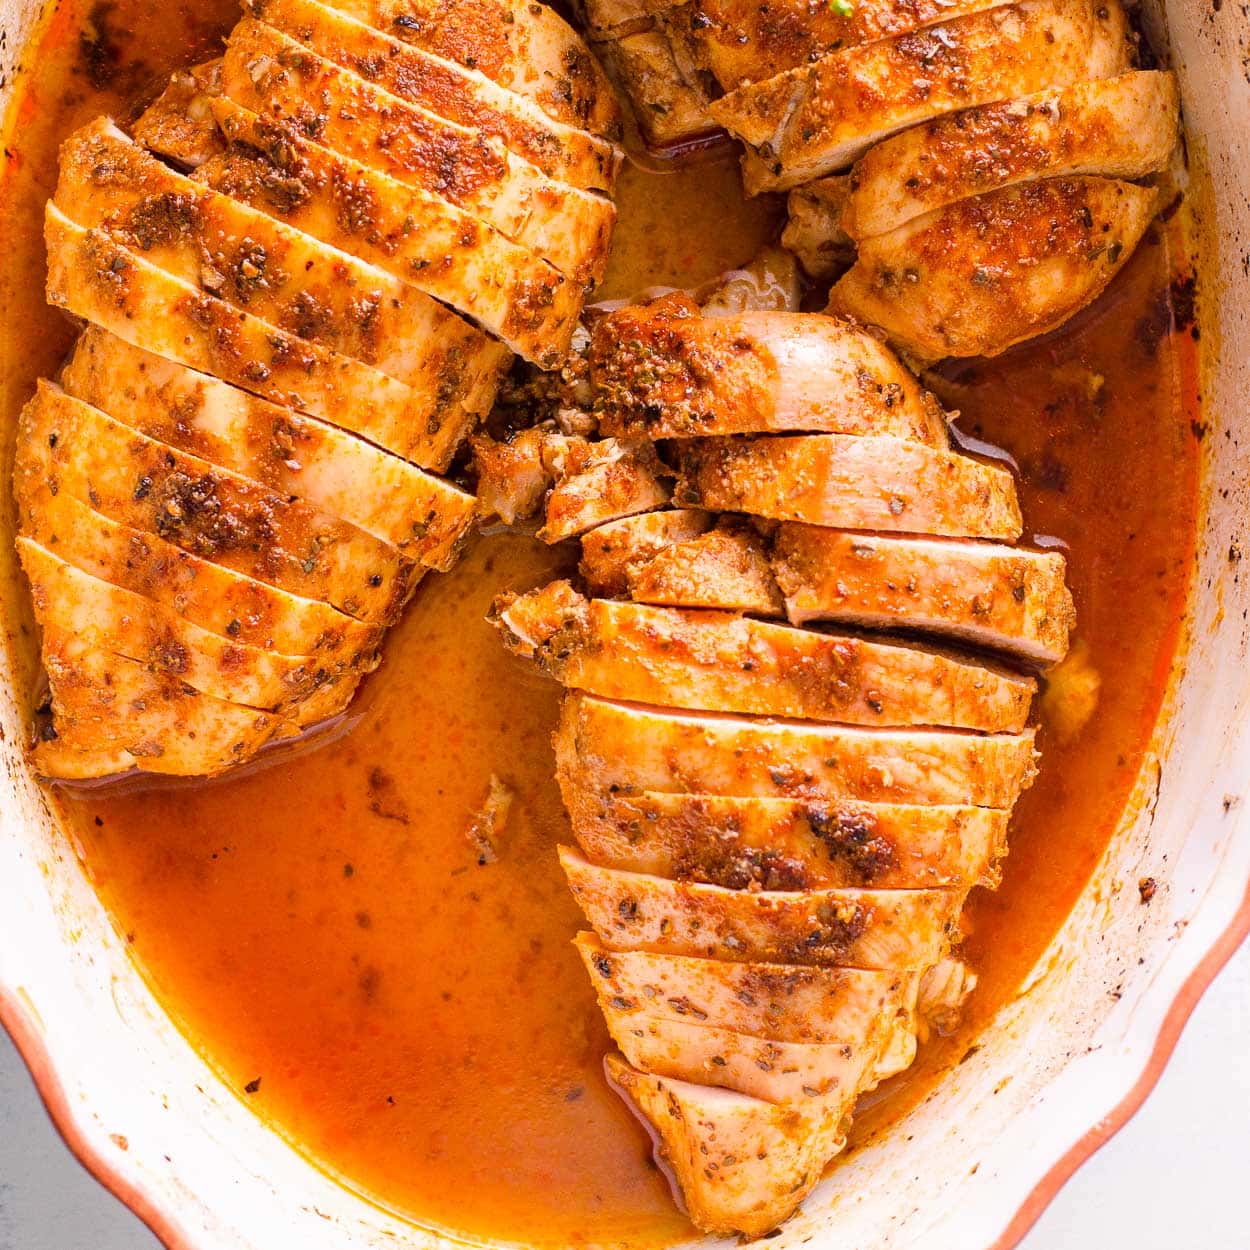 https://ifoodreal.com/wp-content/uploads/2022/03/fg-healthy-oven-baked-chicken-breast-recipe.jpg